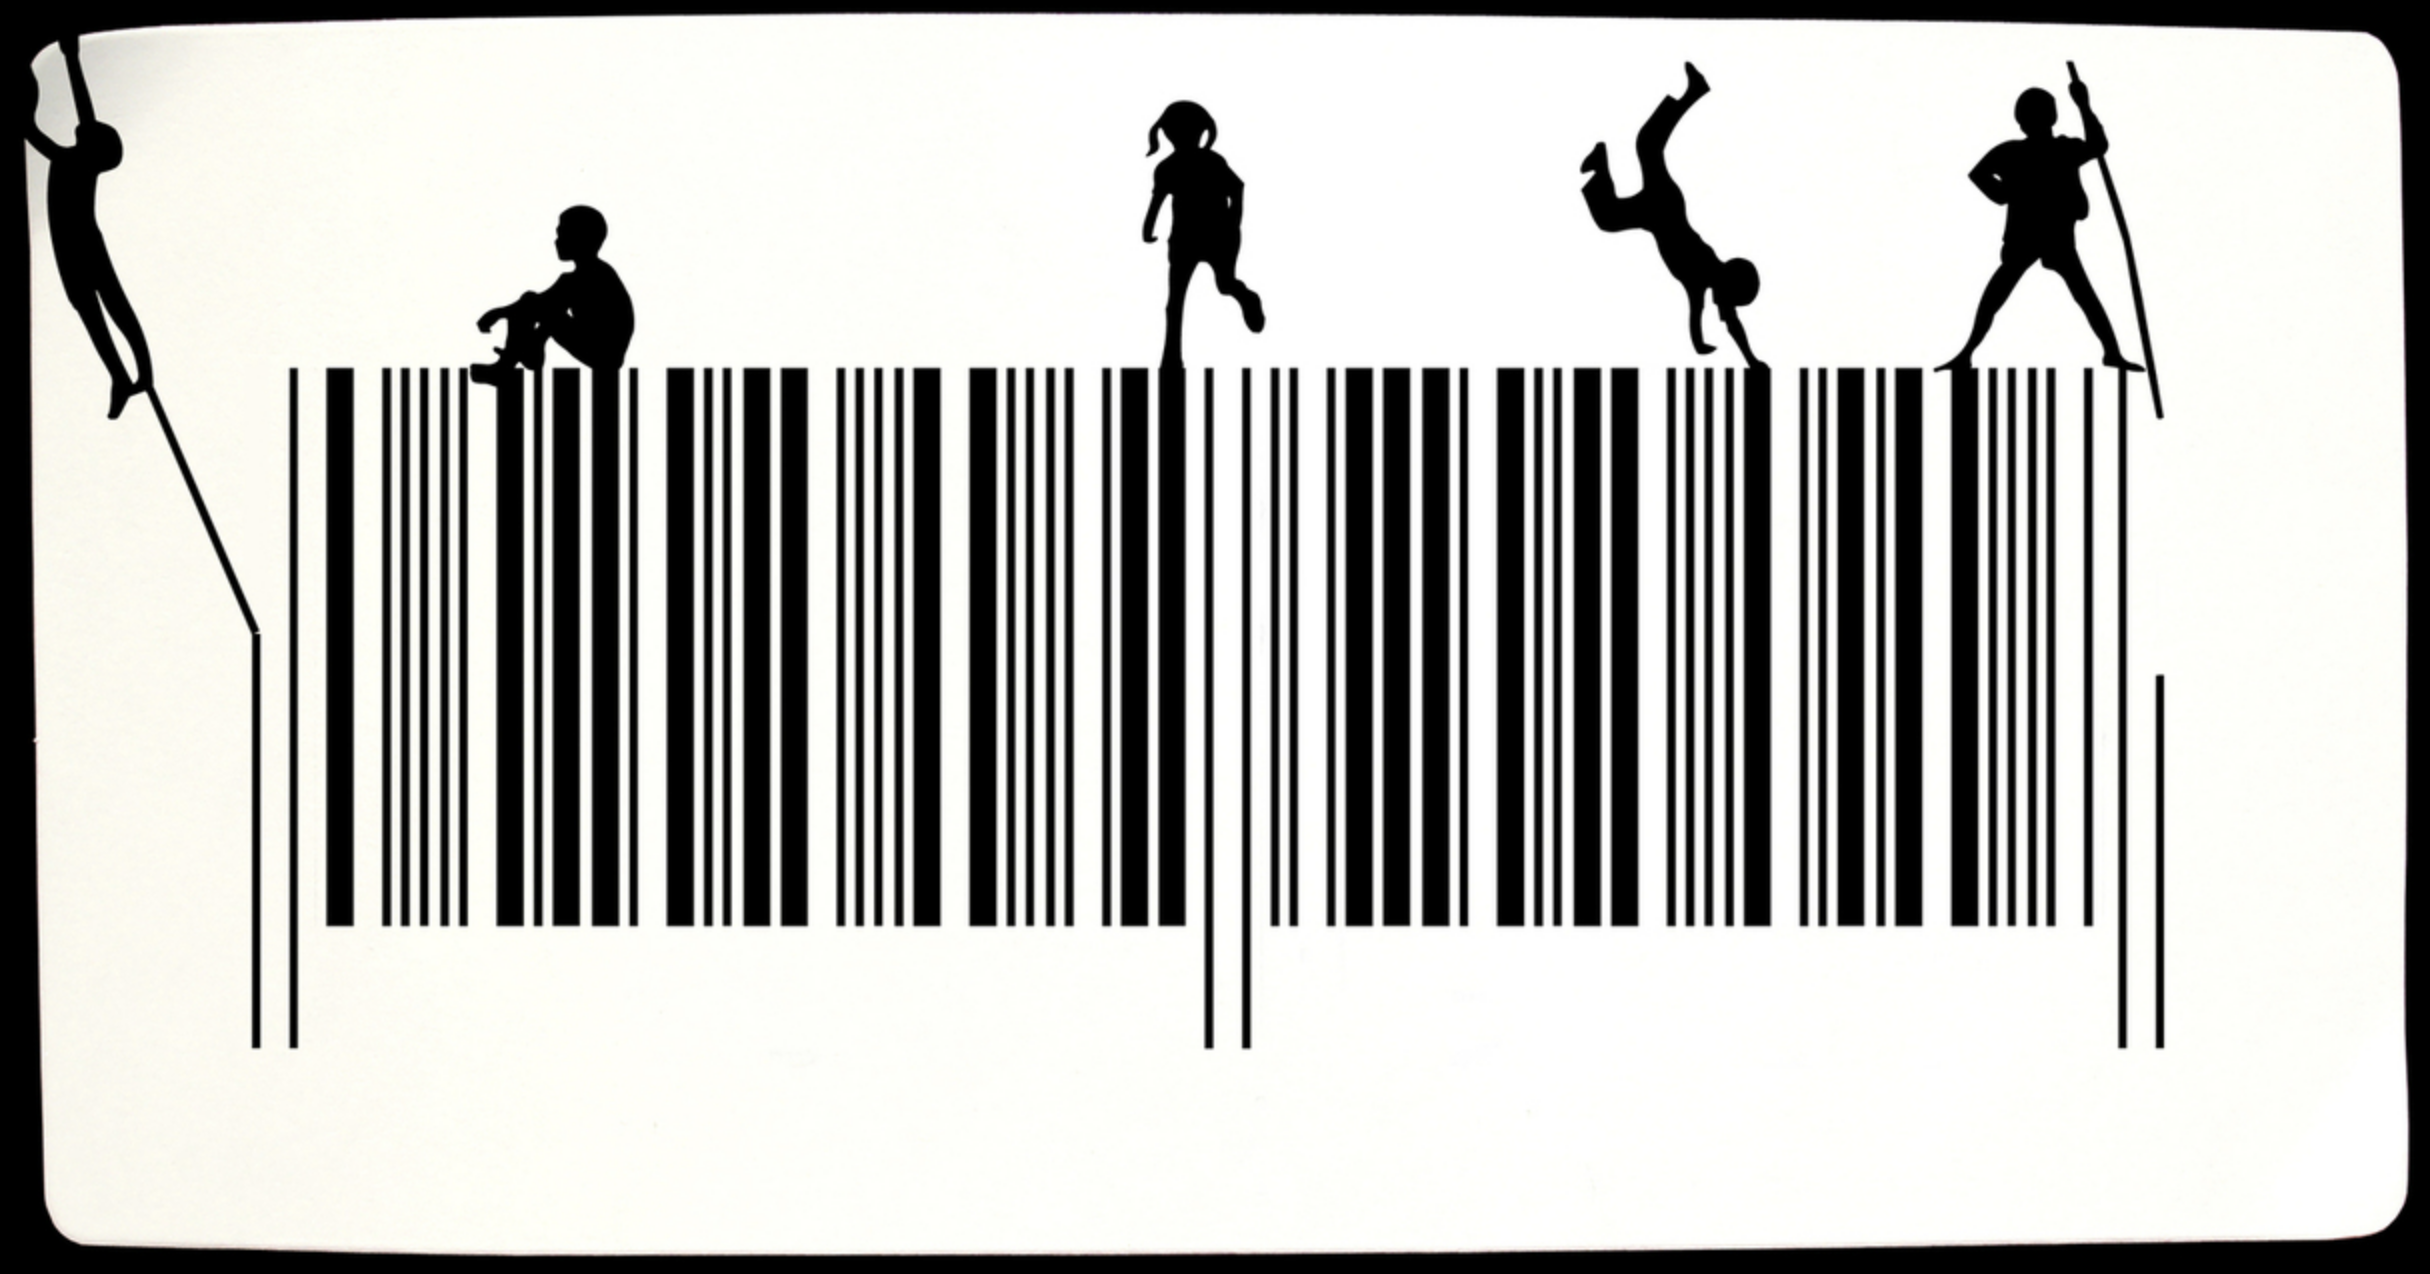 Barcode Inventory